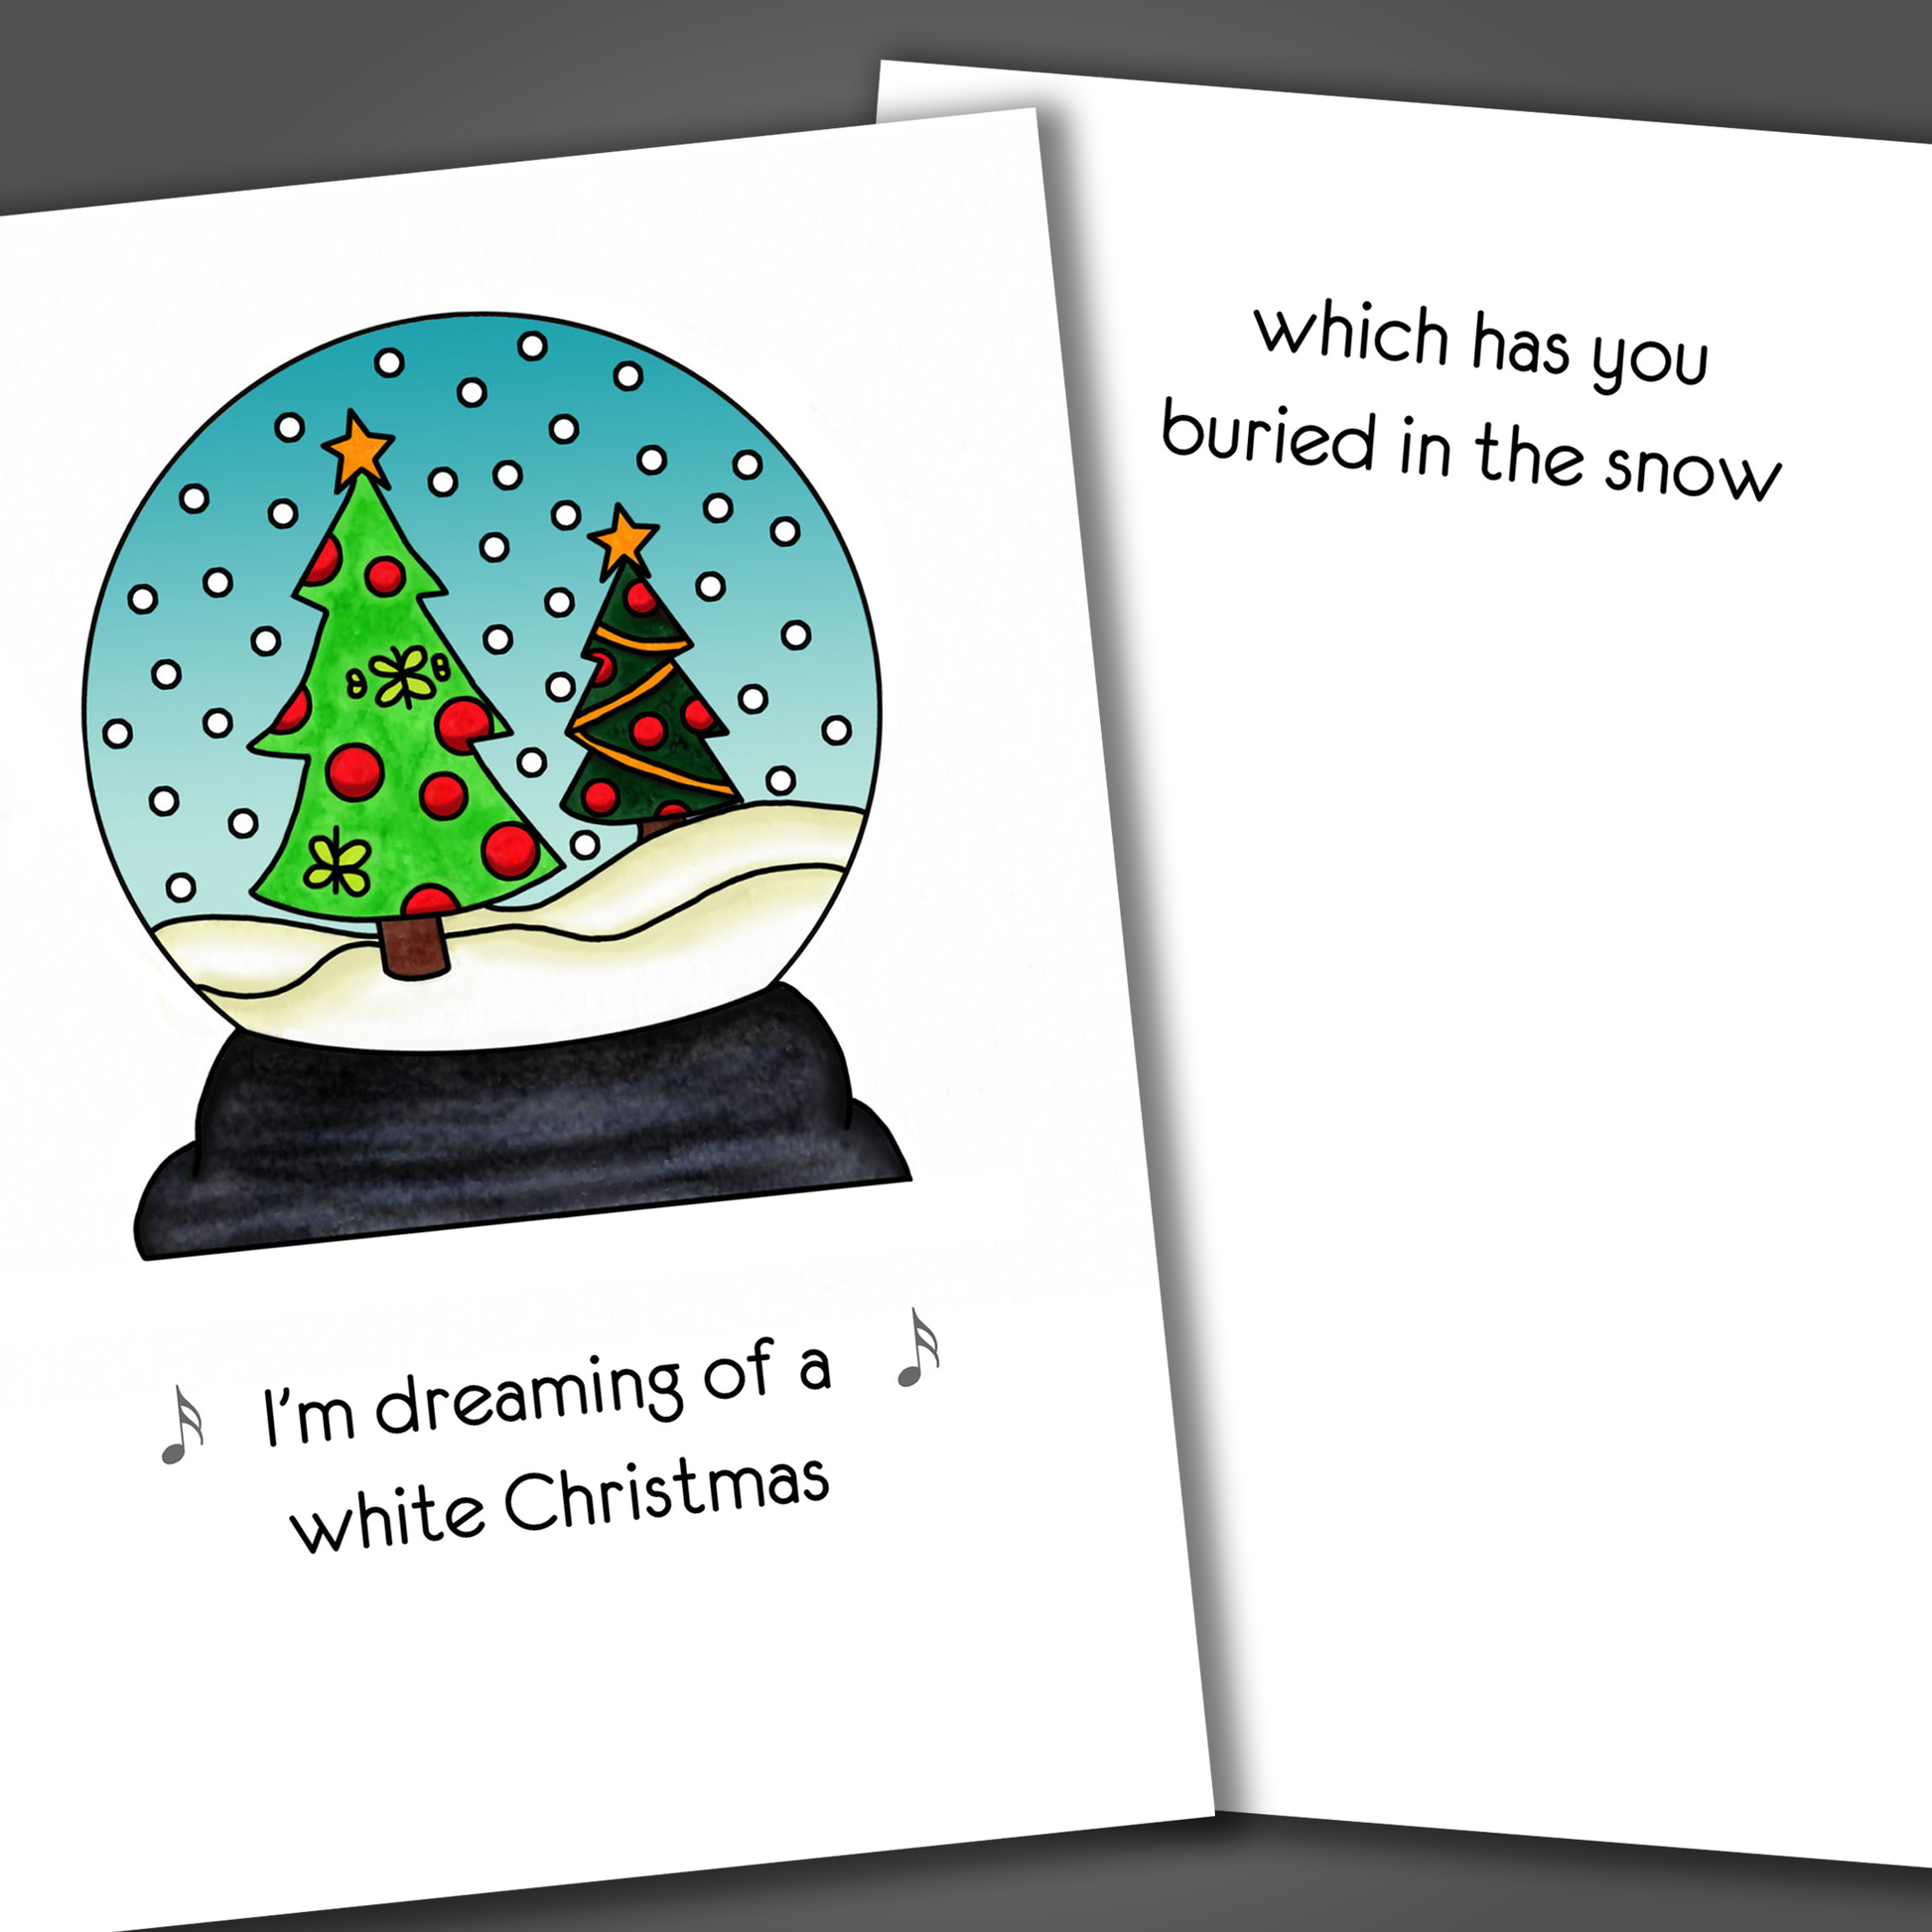 Funny Christmas card with a snow globe drawn on the front of the card. Inside the card is a joke that wishes someone gets buried in snow.